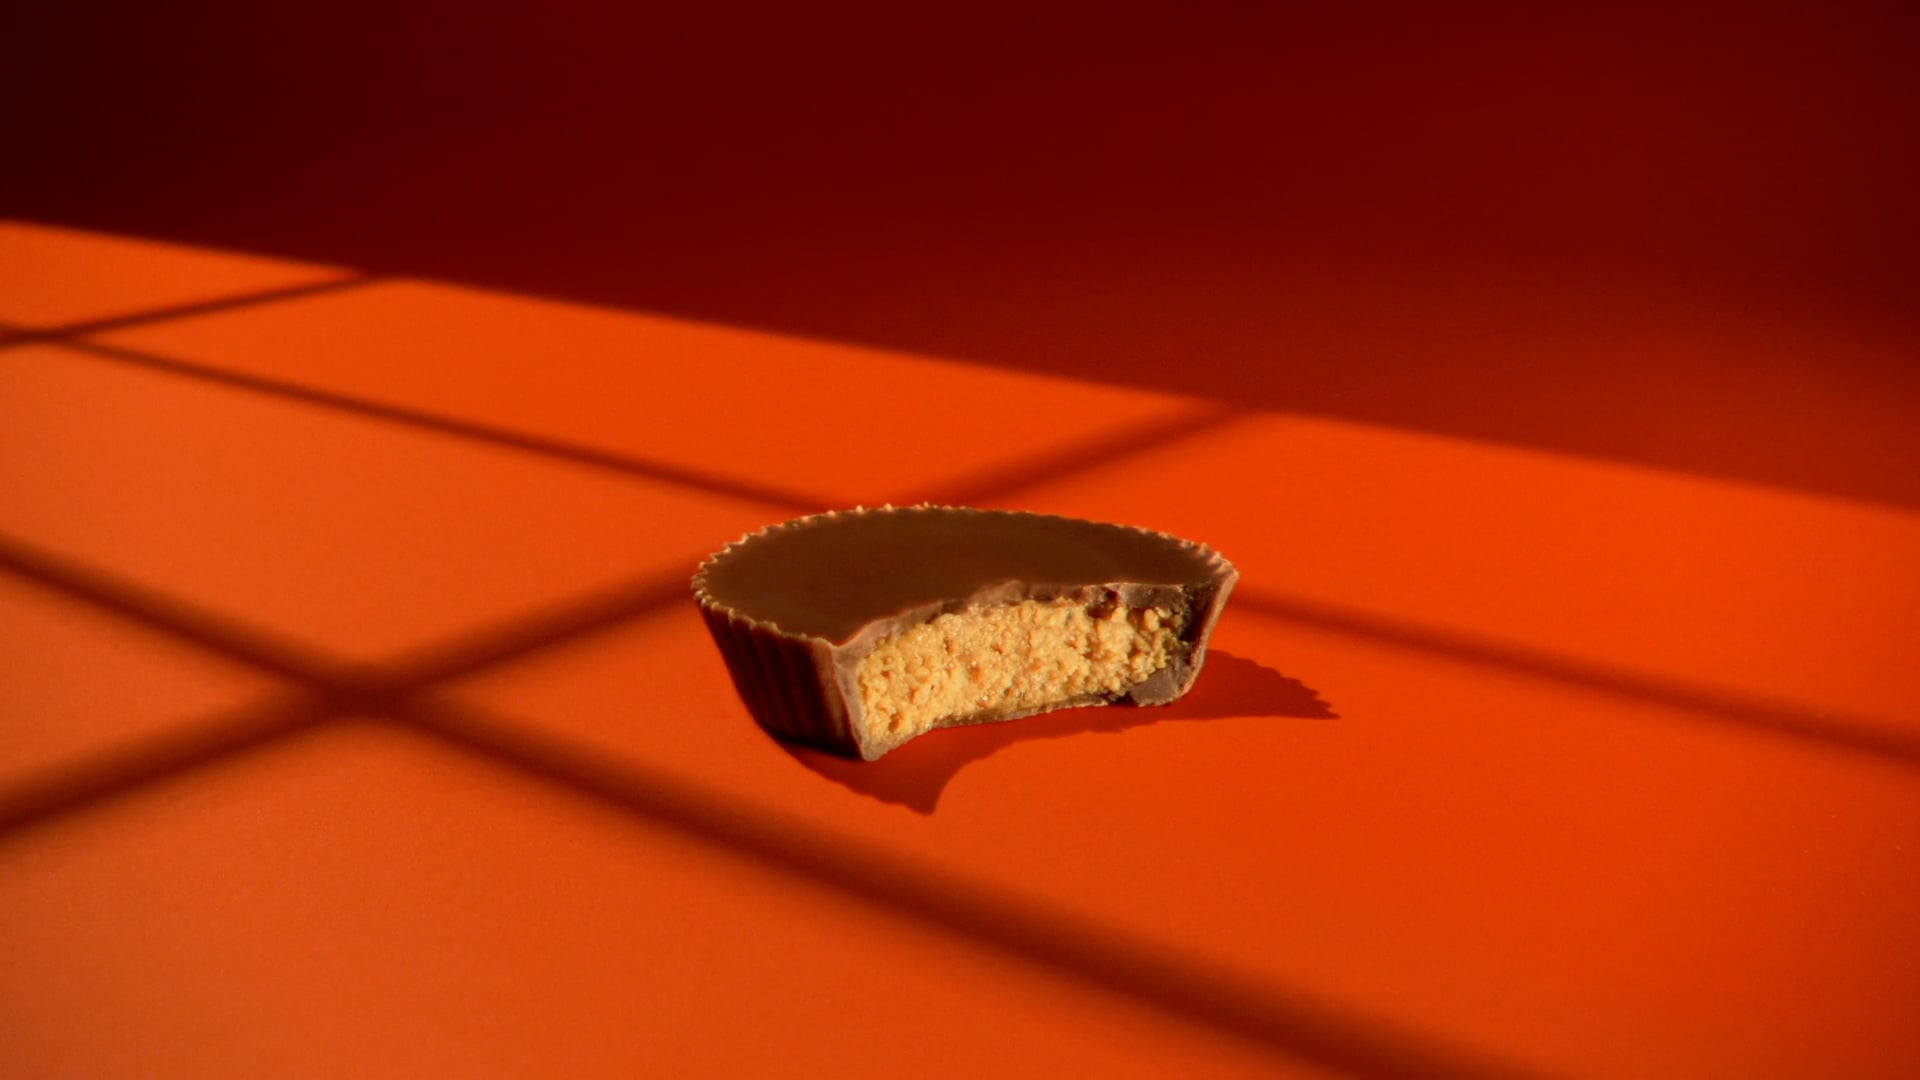 Reese's "Trick"